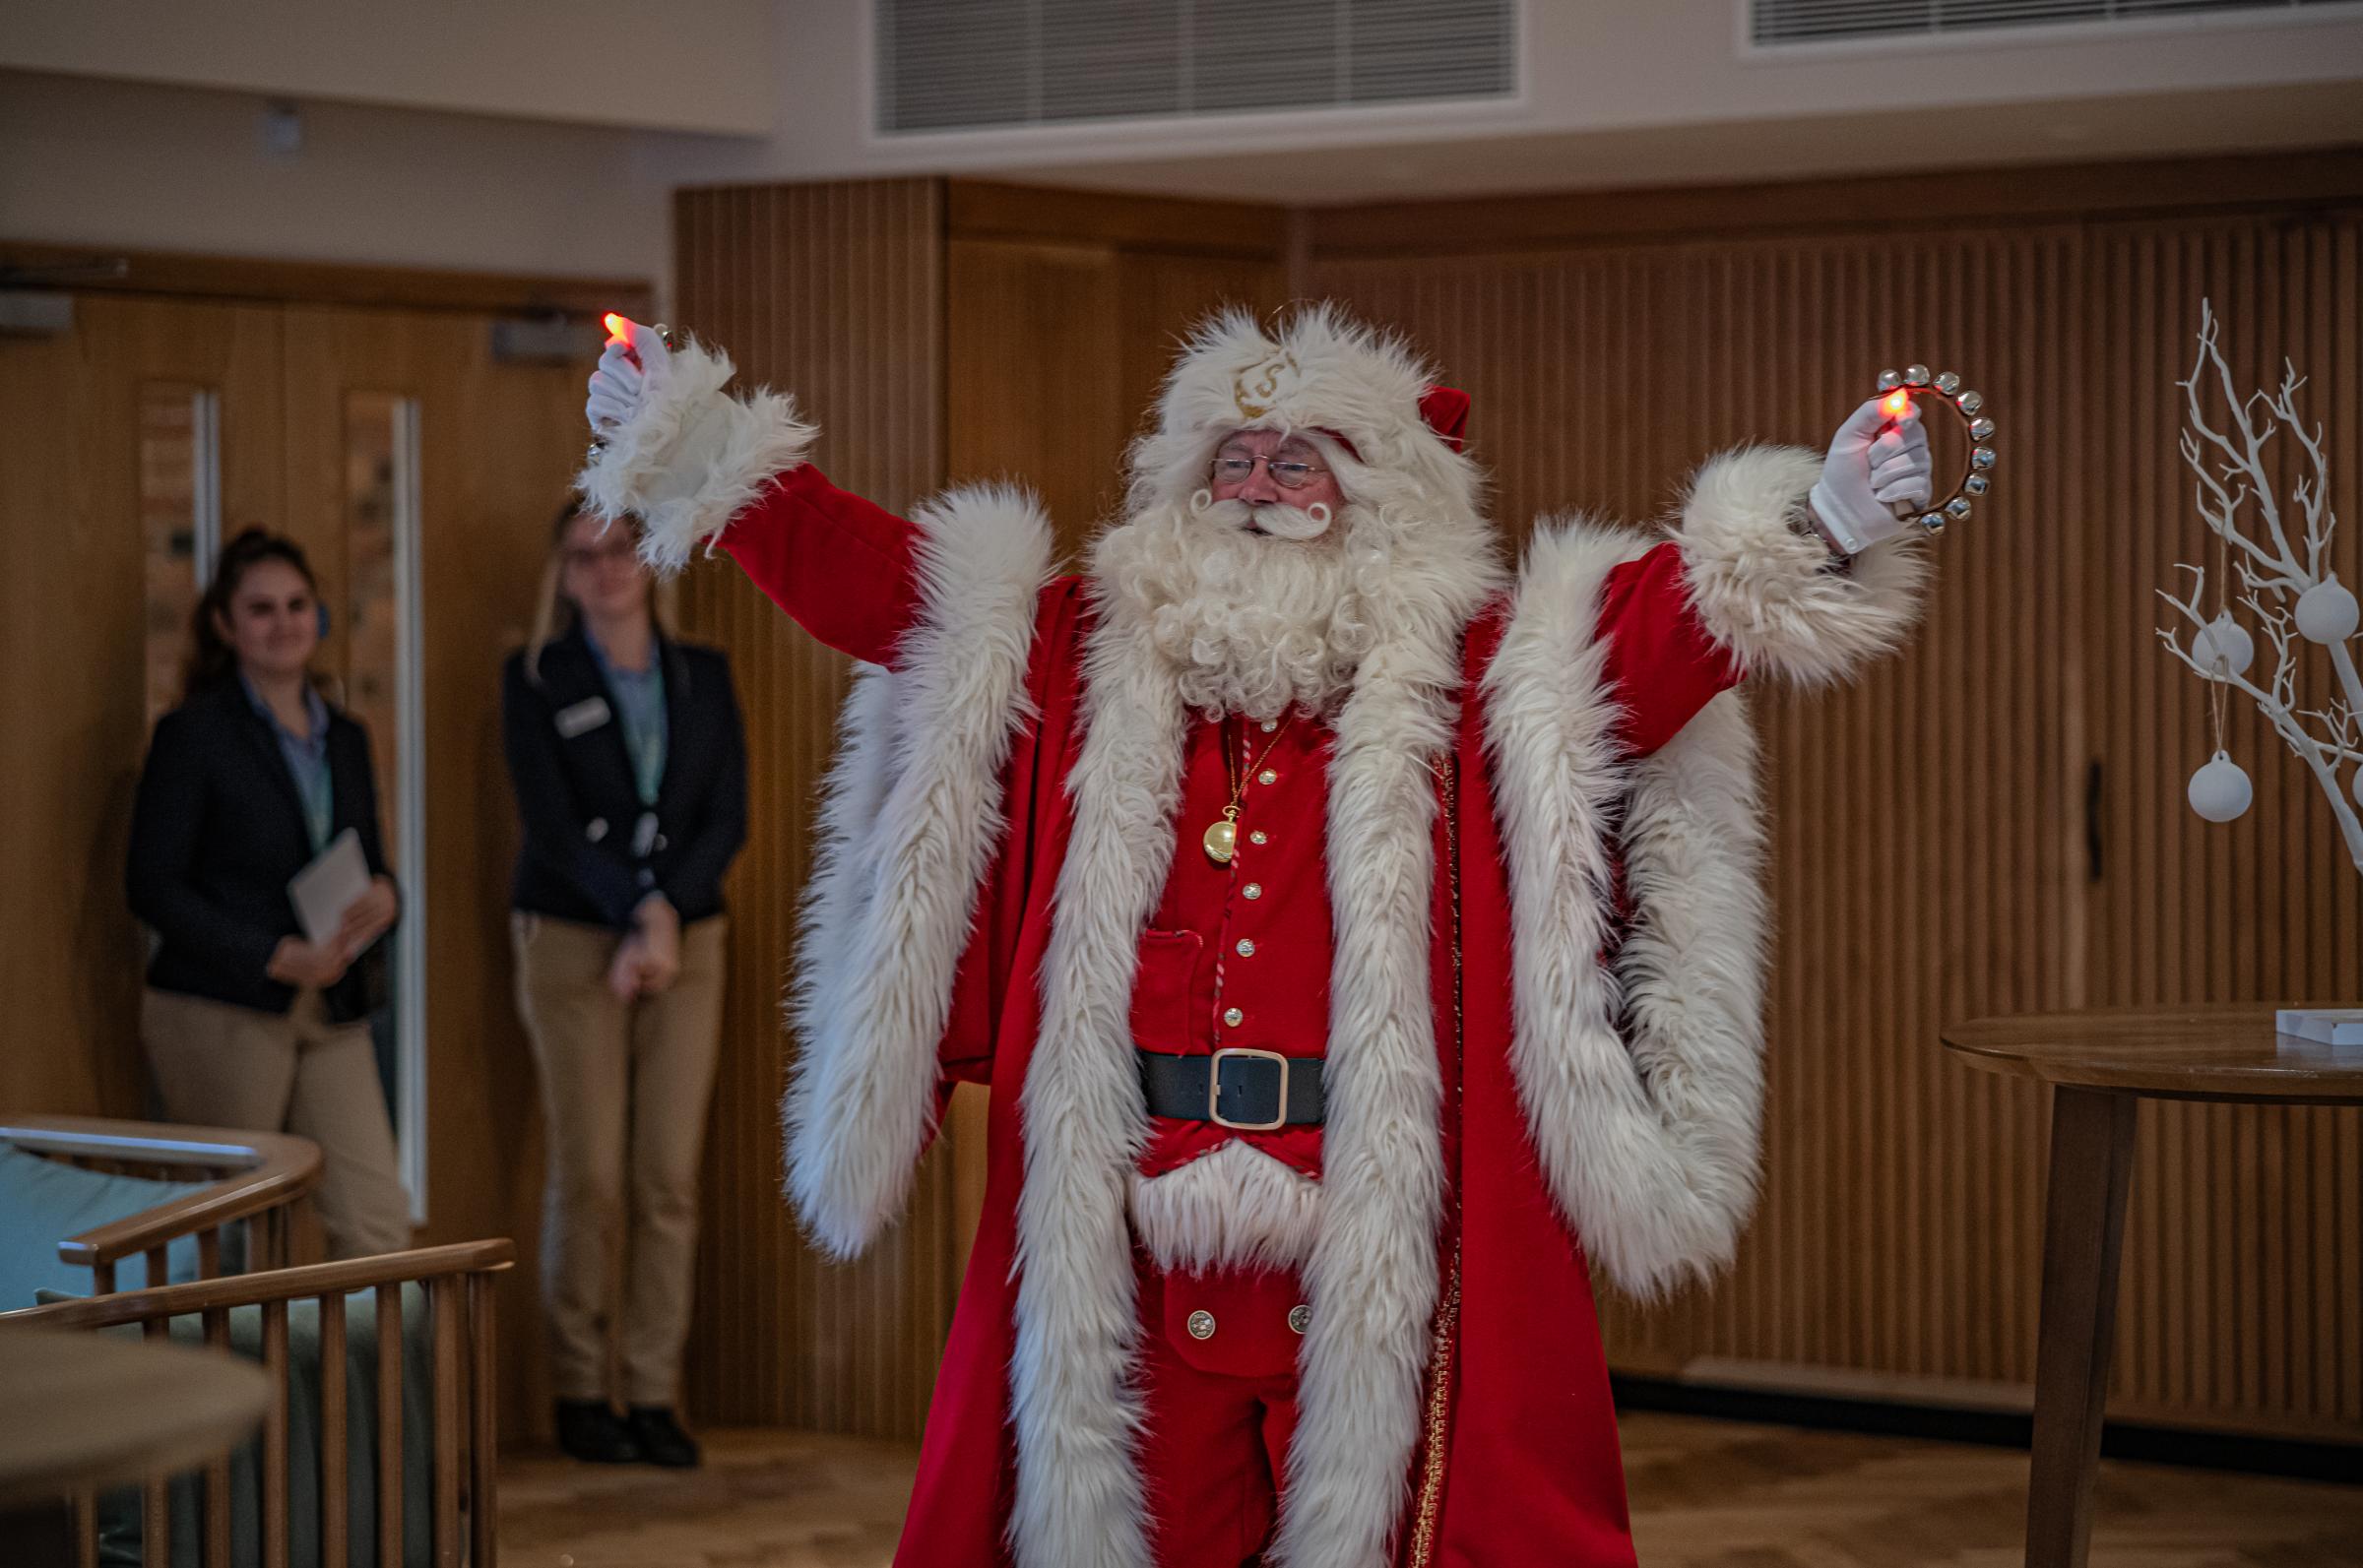 Father Christmas paid a visit to the special event.